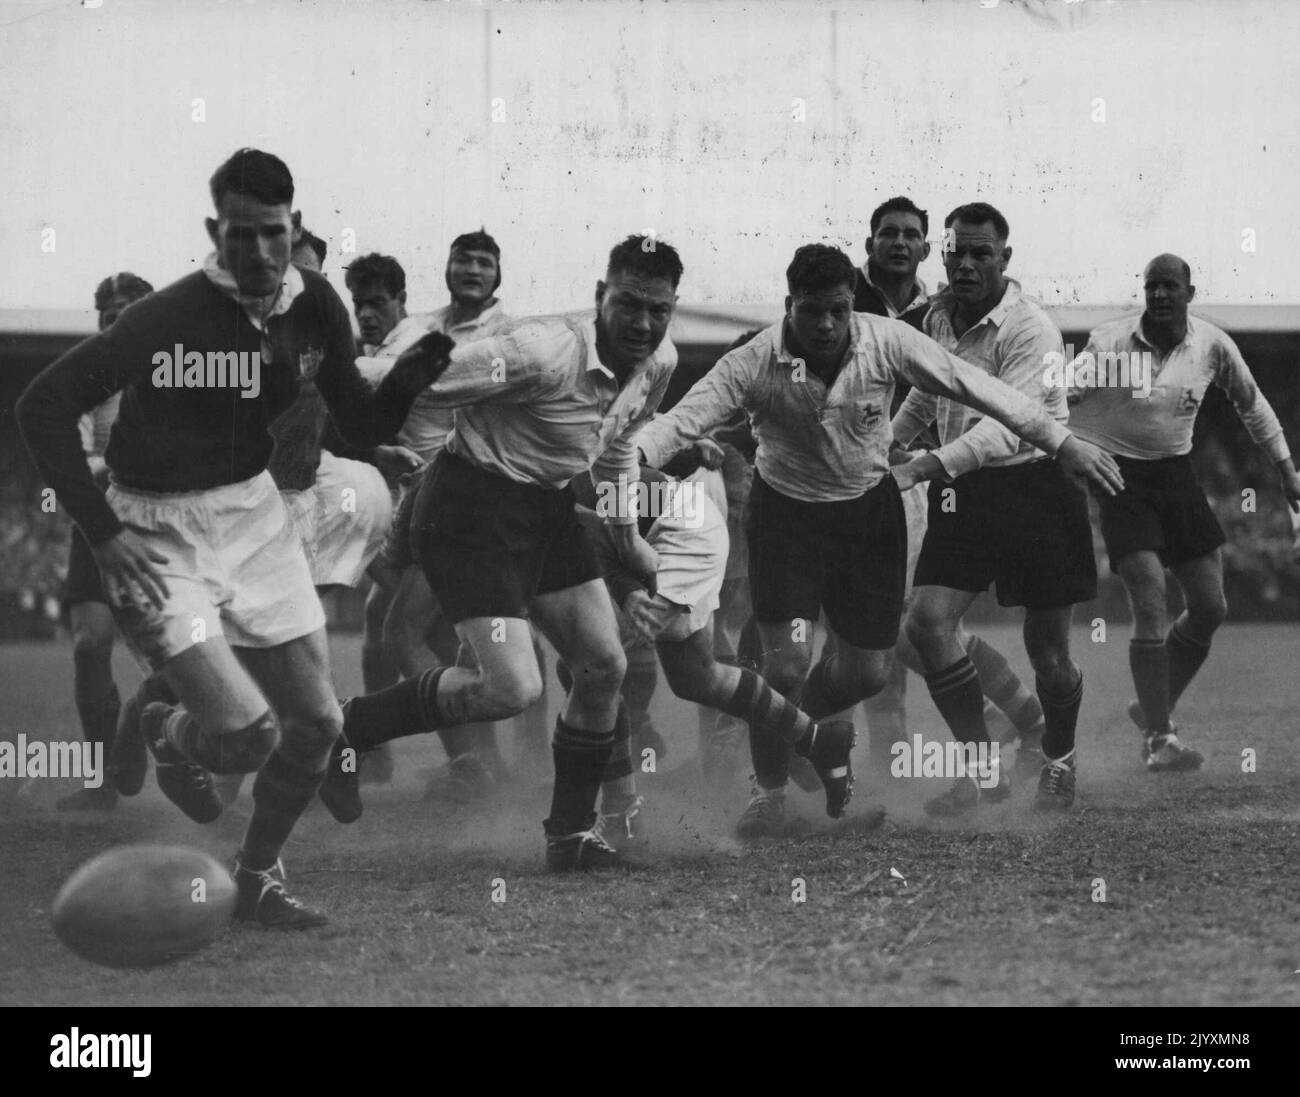 South African forwards break through from a lineout, with Australian Garth Jones falling back in defence, during the second Rugby union test at Capetown. Australia won, 18-14. Jones scored the winning try. September 19, 1953. Stock Photo